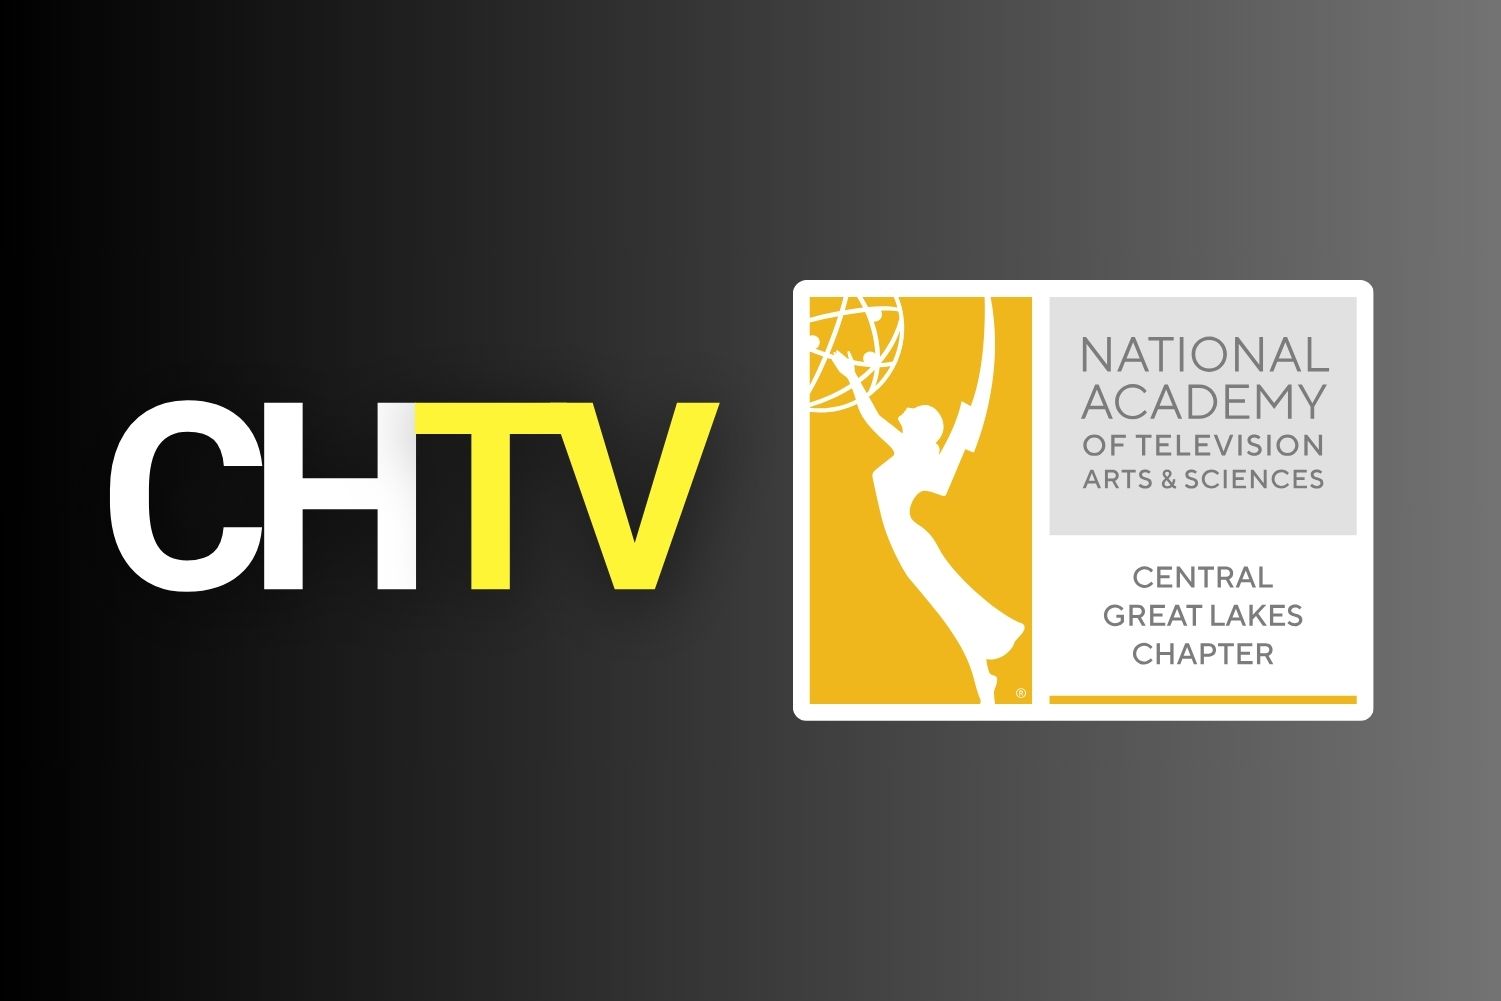 The CHTV logo next to the National Academy of Television Arts & Sciences (NATAS) and the Lower Great Lakes Chapter logo